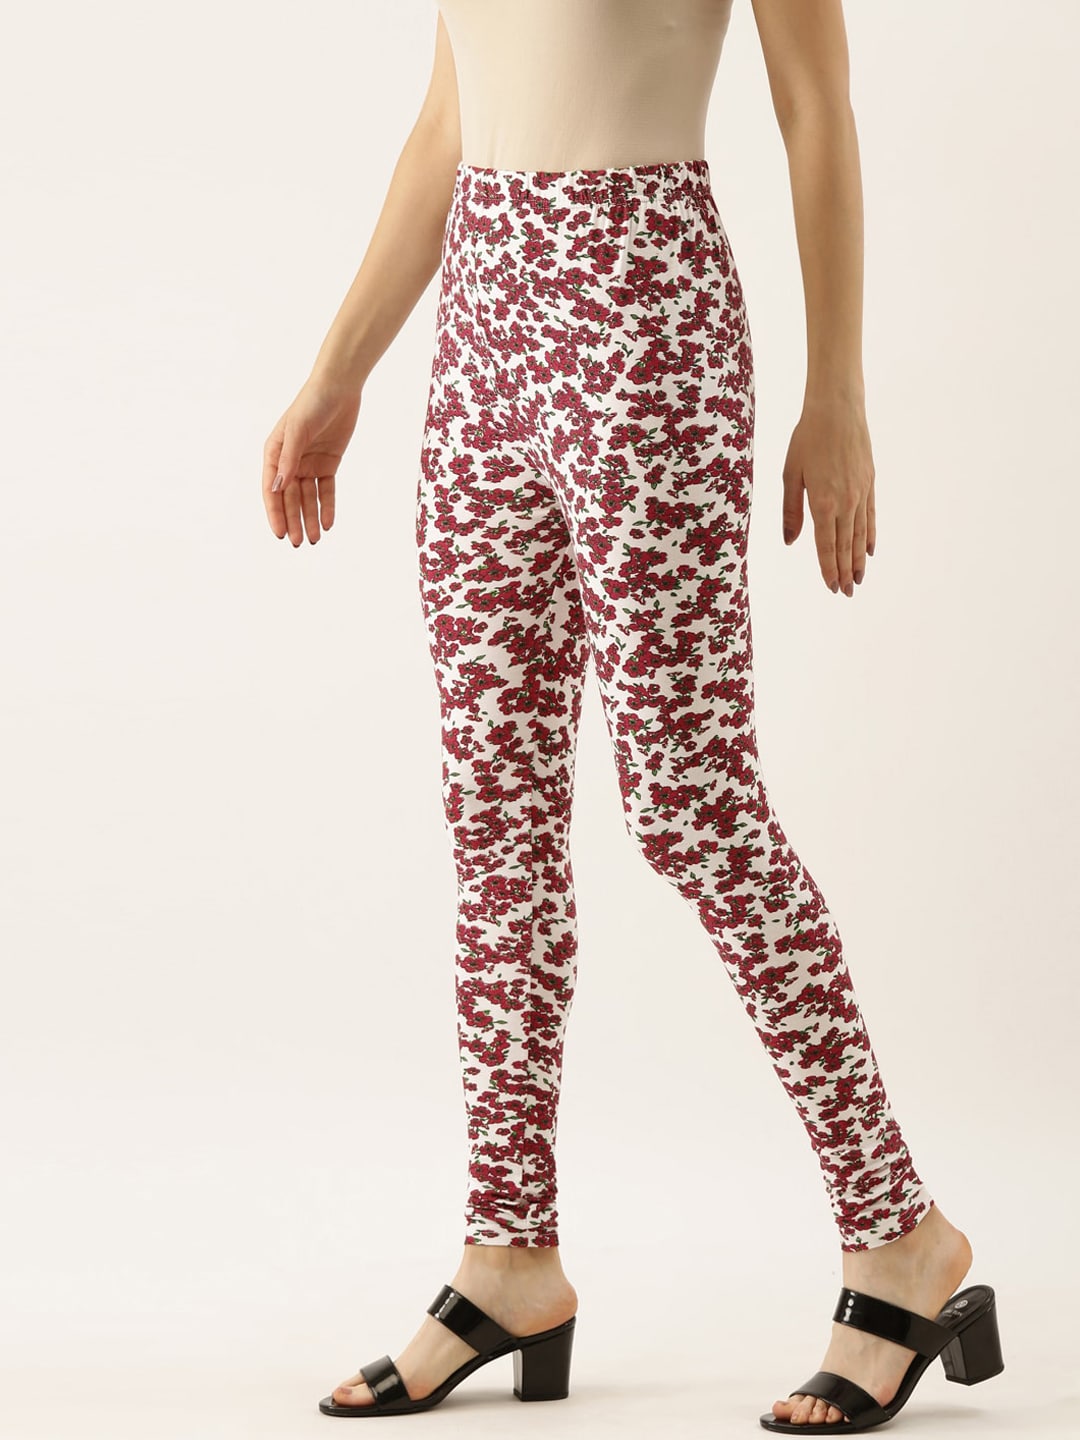 Souchii White & Red Printed Slim-Fit Ankle-Length Leggings